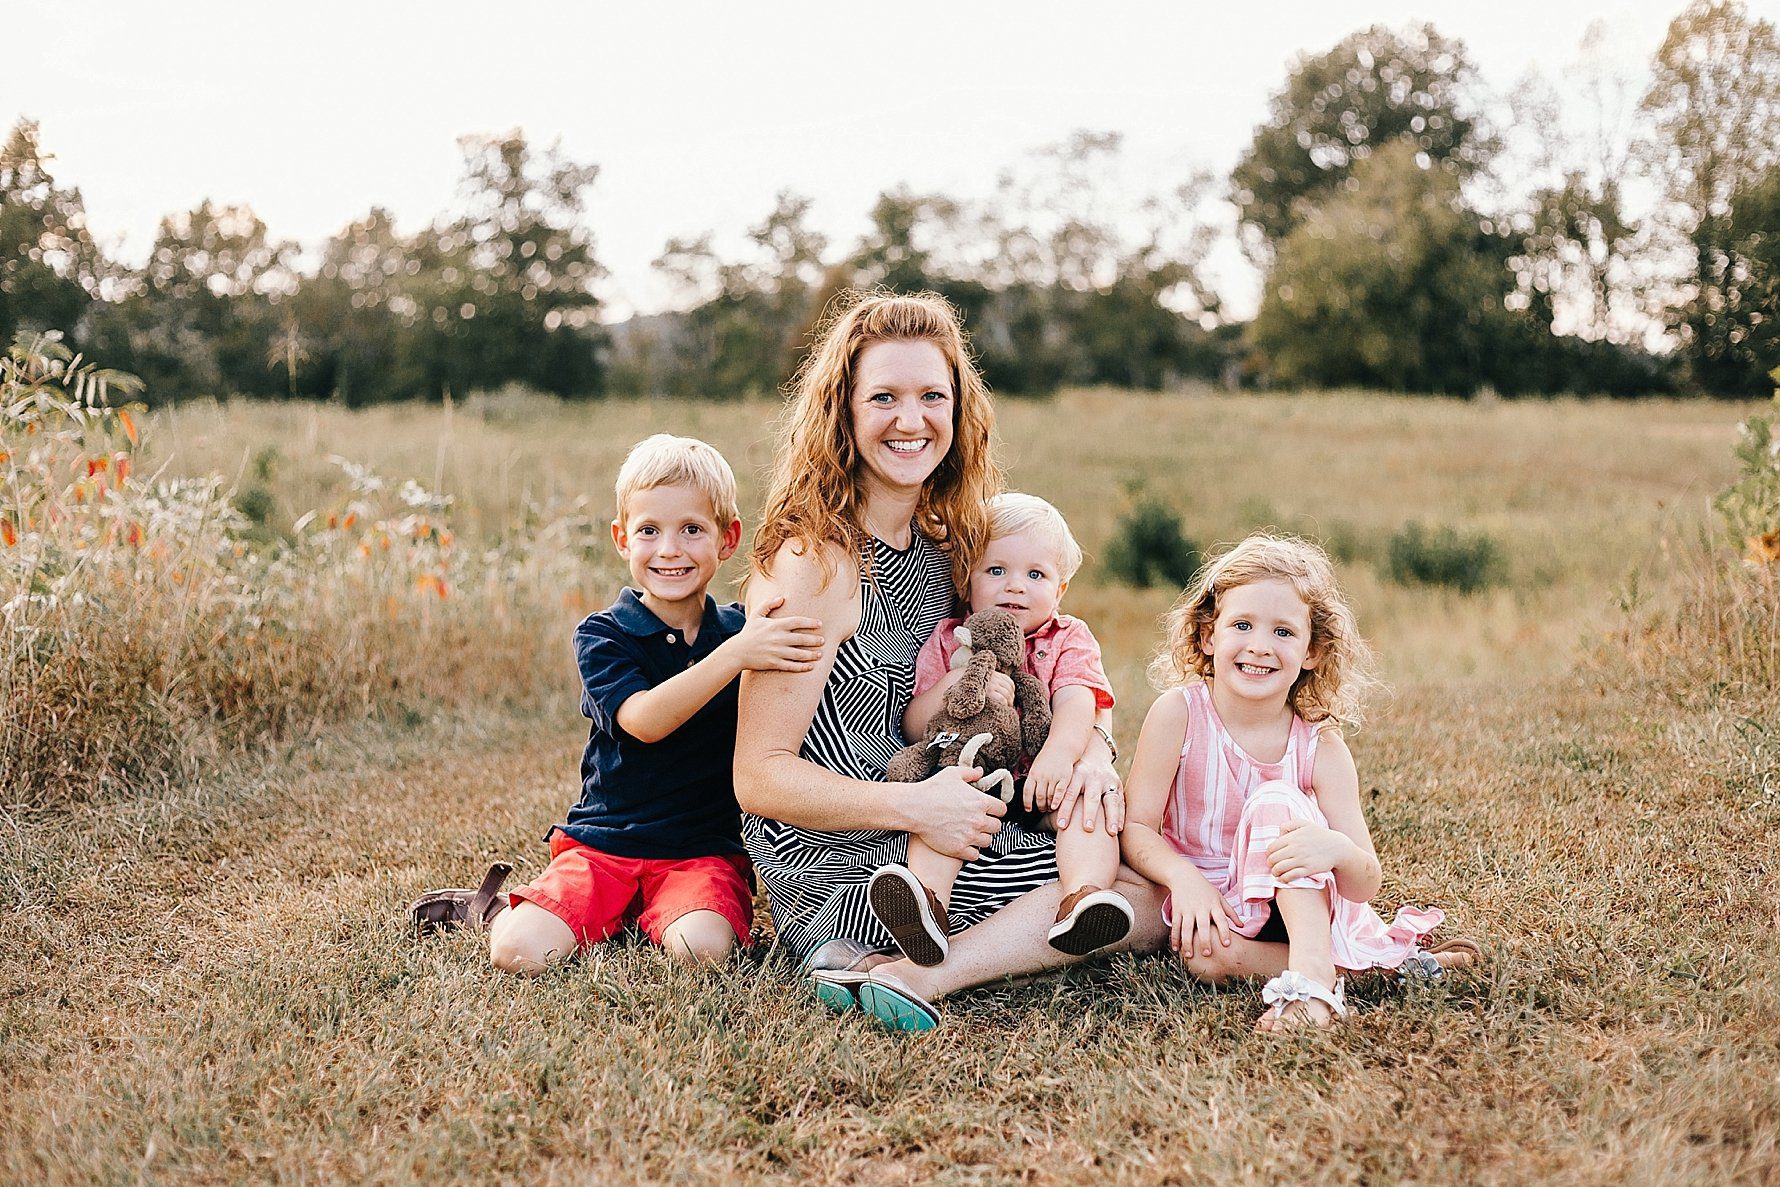 Family Photographers in Knoxville | Erin Morrison Photography www.erinmorrisonphotography.com